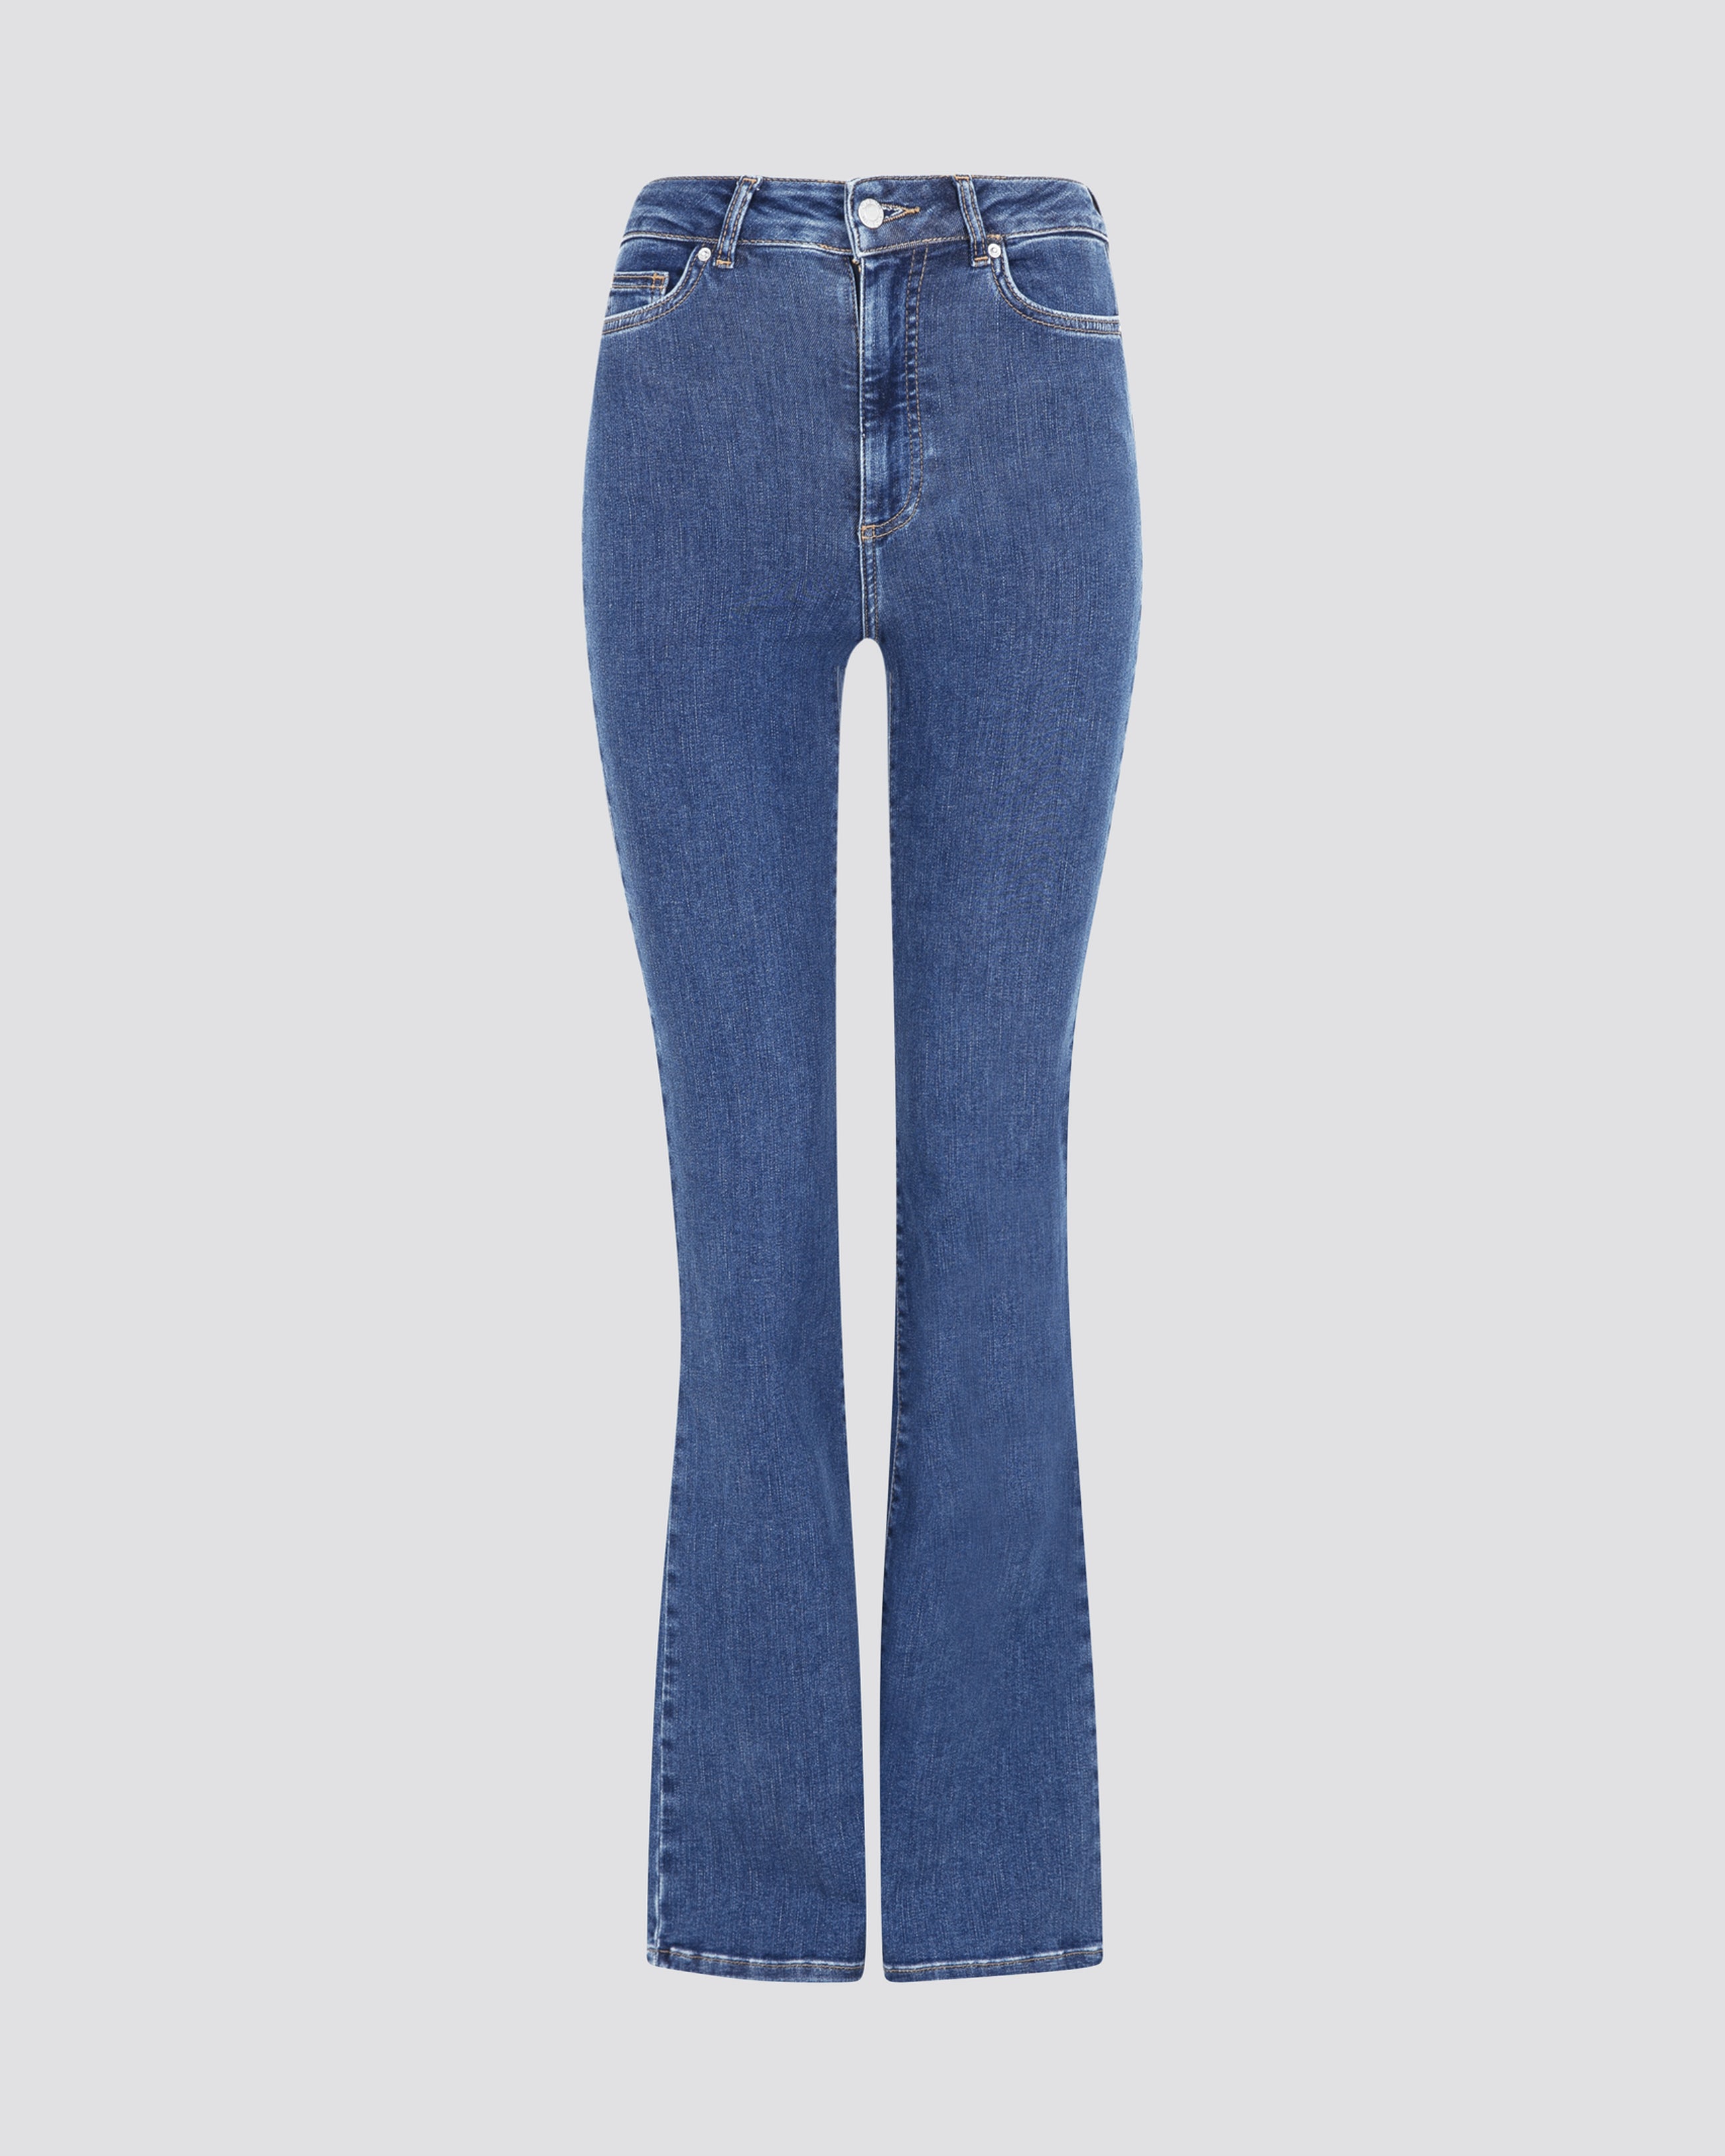 Stretchy jeans